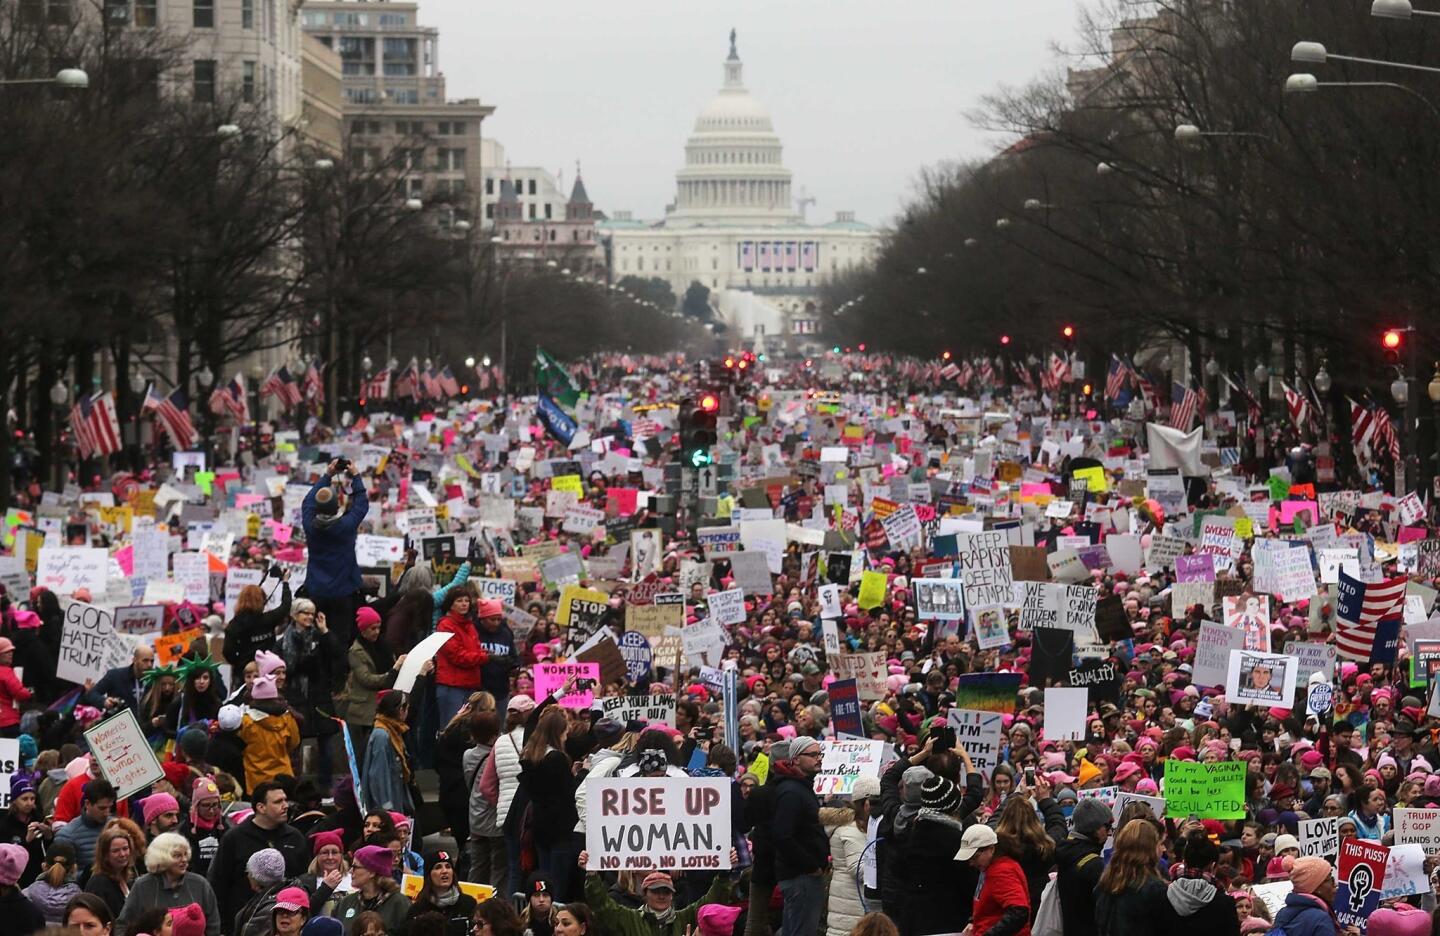 Protesters walk during the Women's March on Washington, with the U.S. Capitol in the background, on January 21, 2017 in Washington, DC. Large crowds are attending the anti-Trump rally a day after U.S. President Donald Trump was sworn in as the 45th U.S. president.